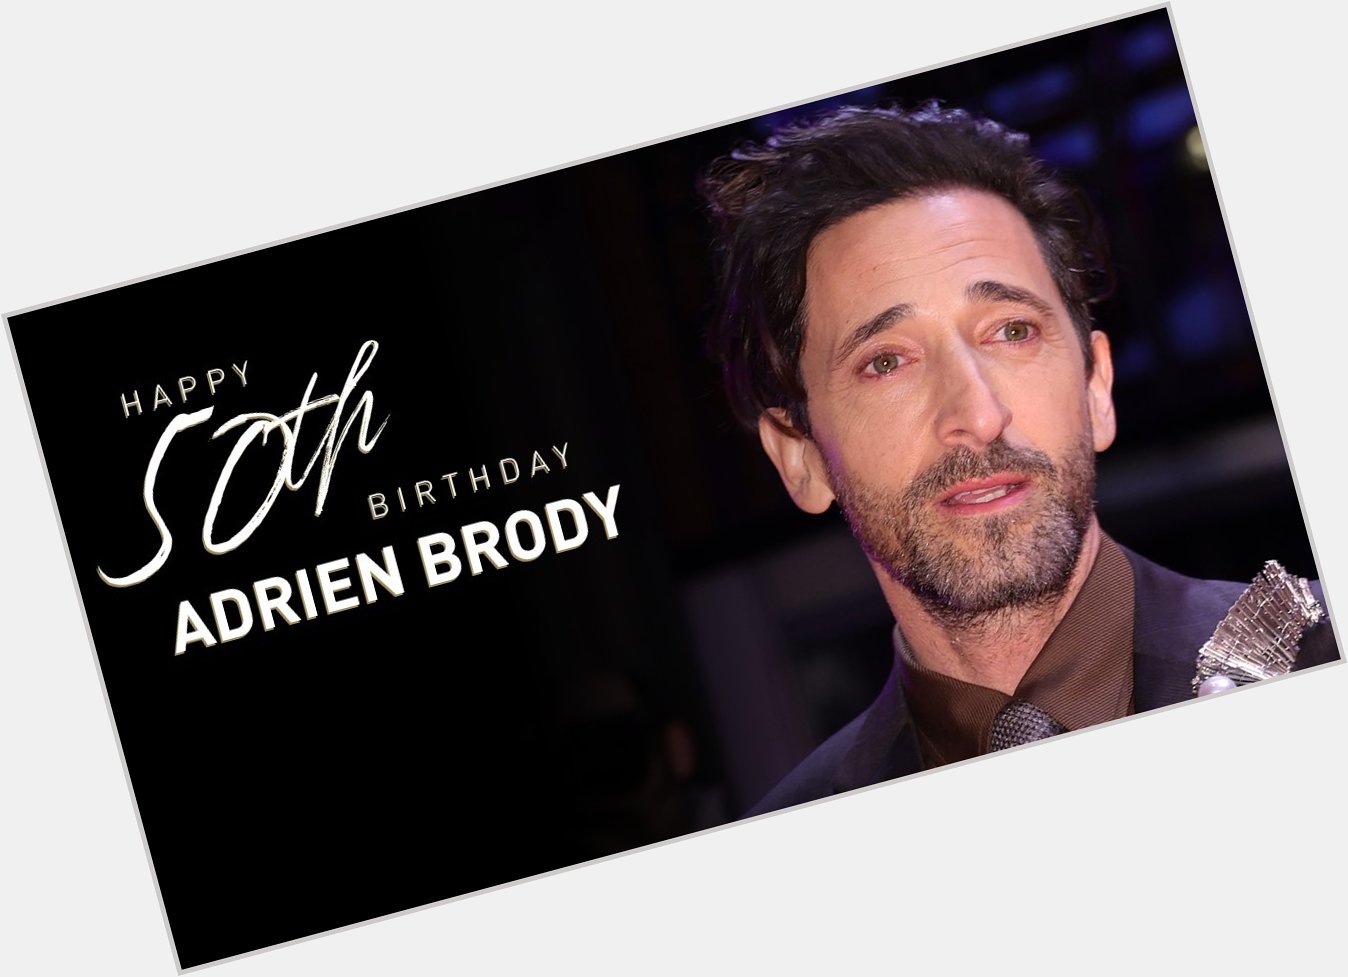 Happy 50th birthday Adrien Brody!

Read his tribute here:  